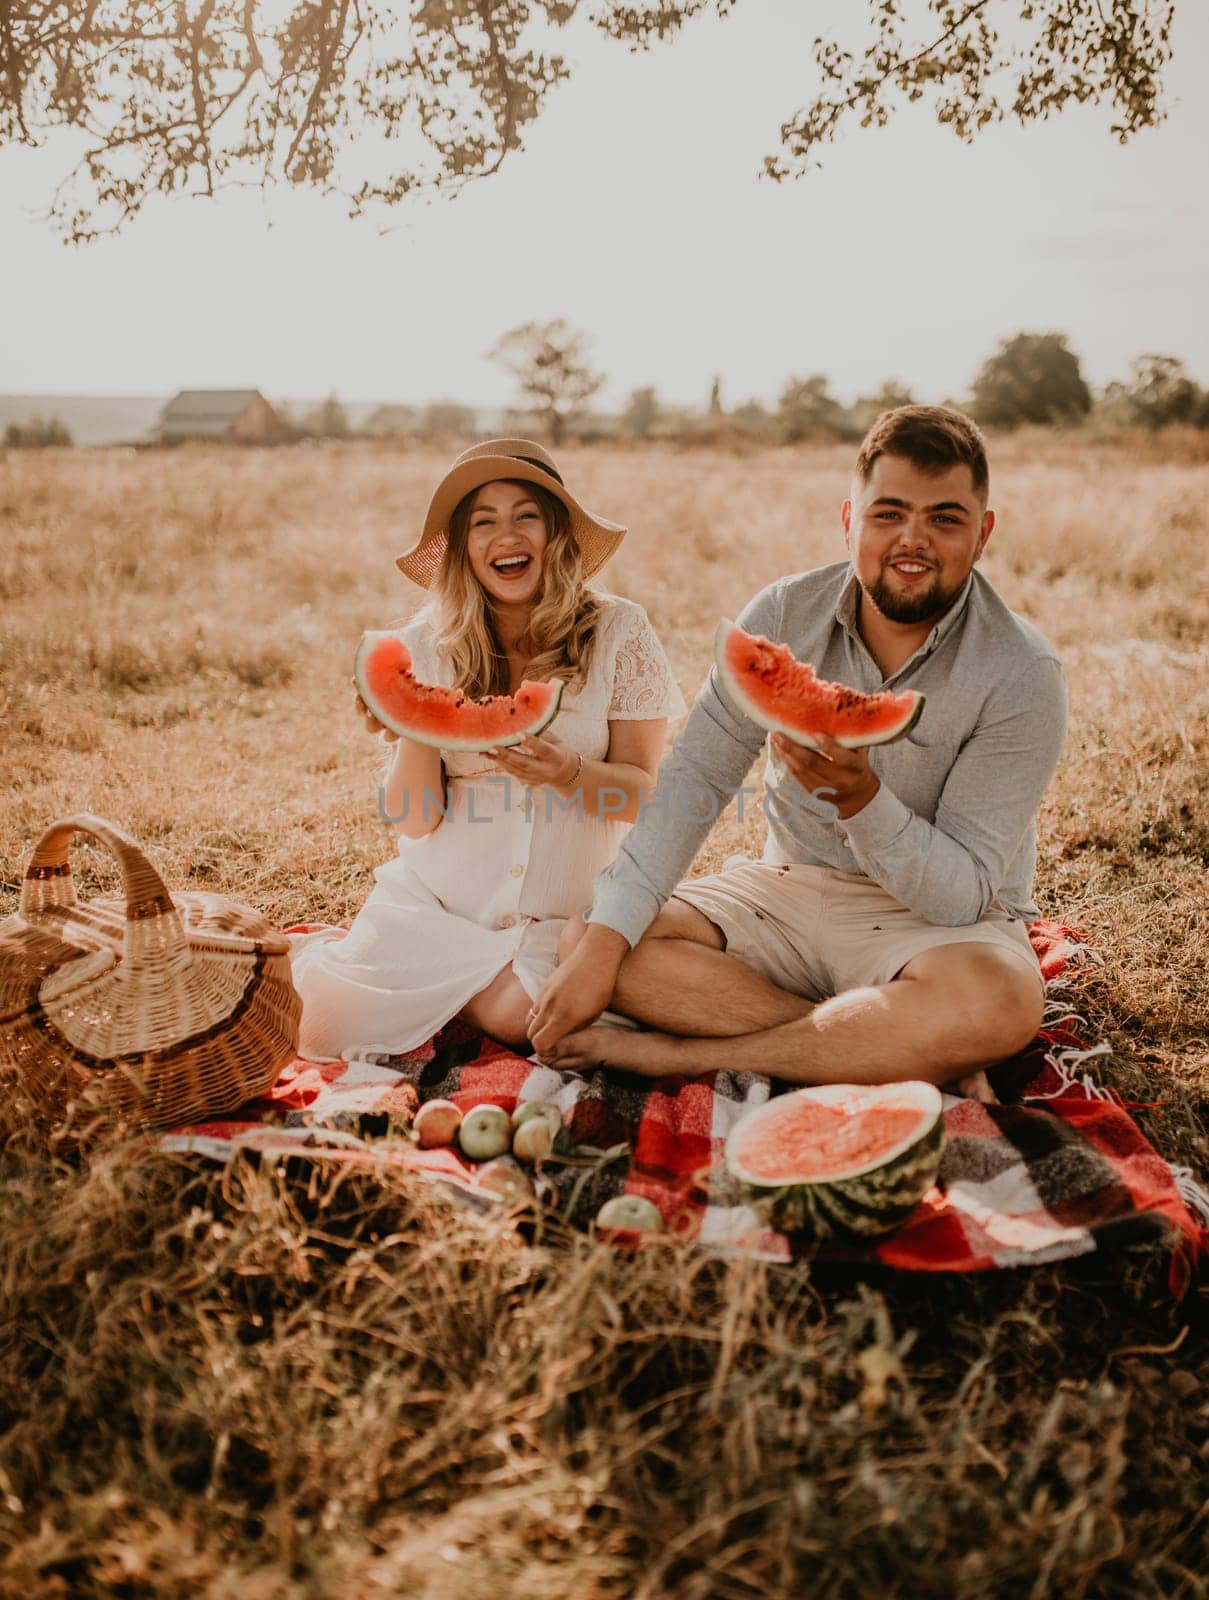 caucasian family with a pregnant woman relaxing in nature picnic eating watermelon laugh having fun by AndriiDrachuk